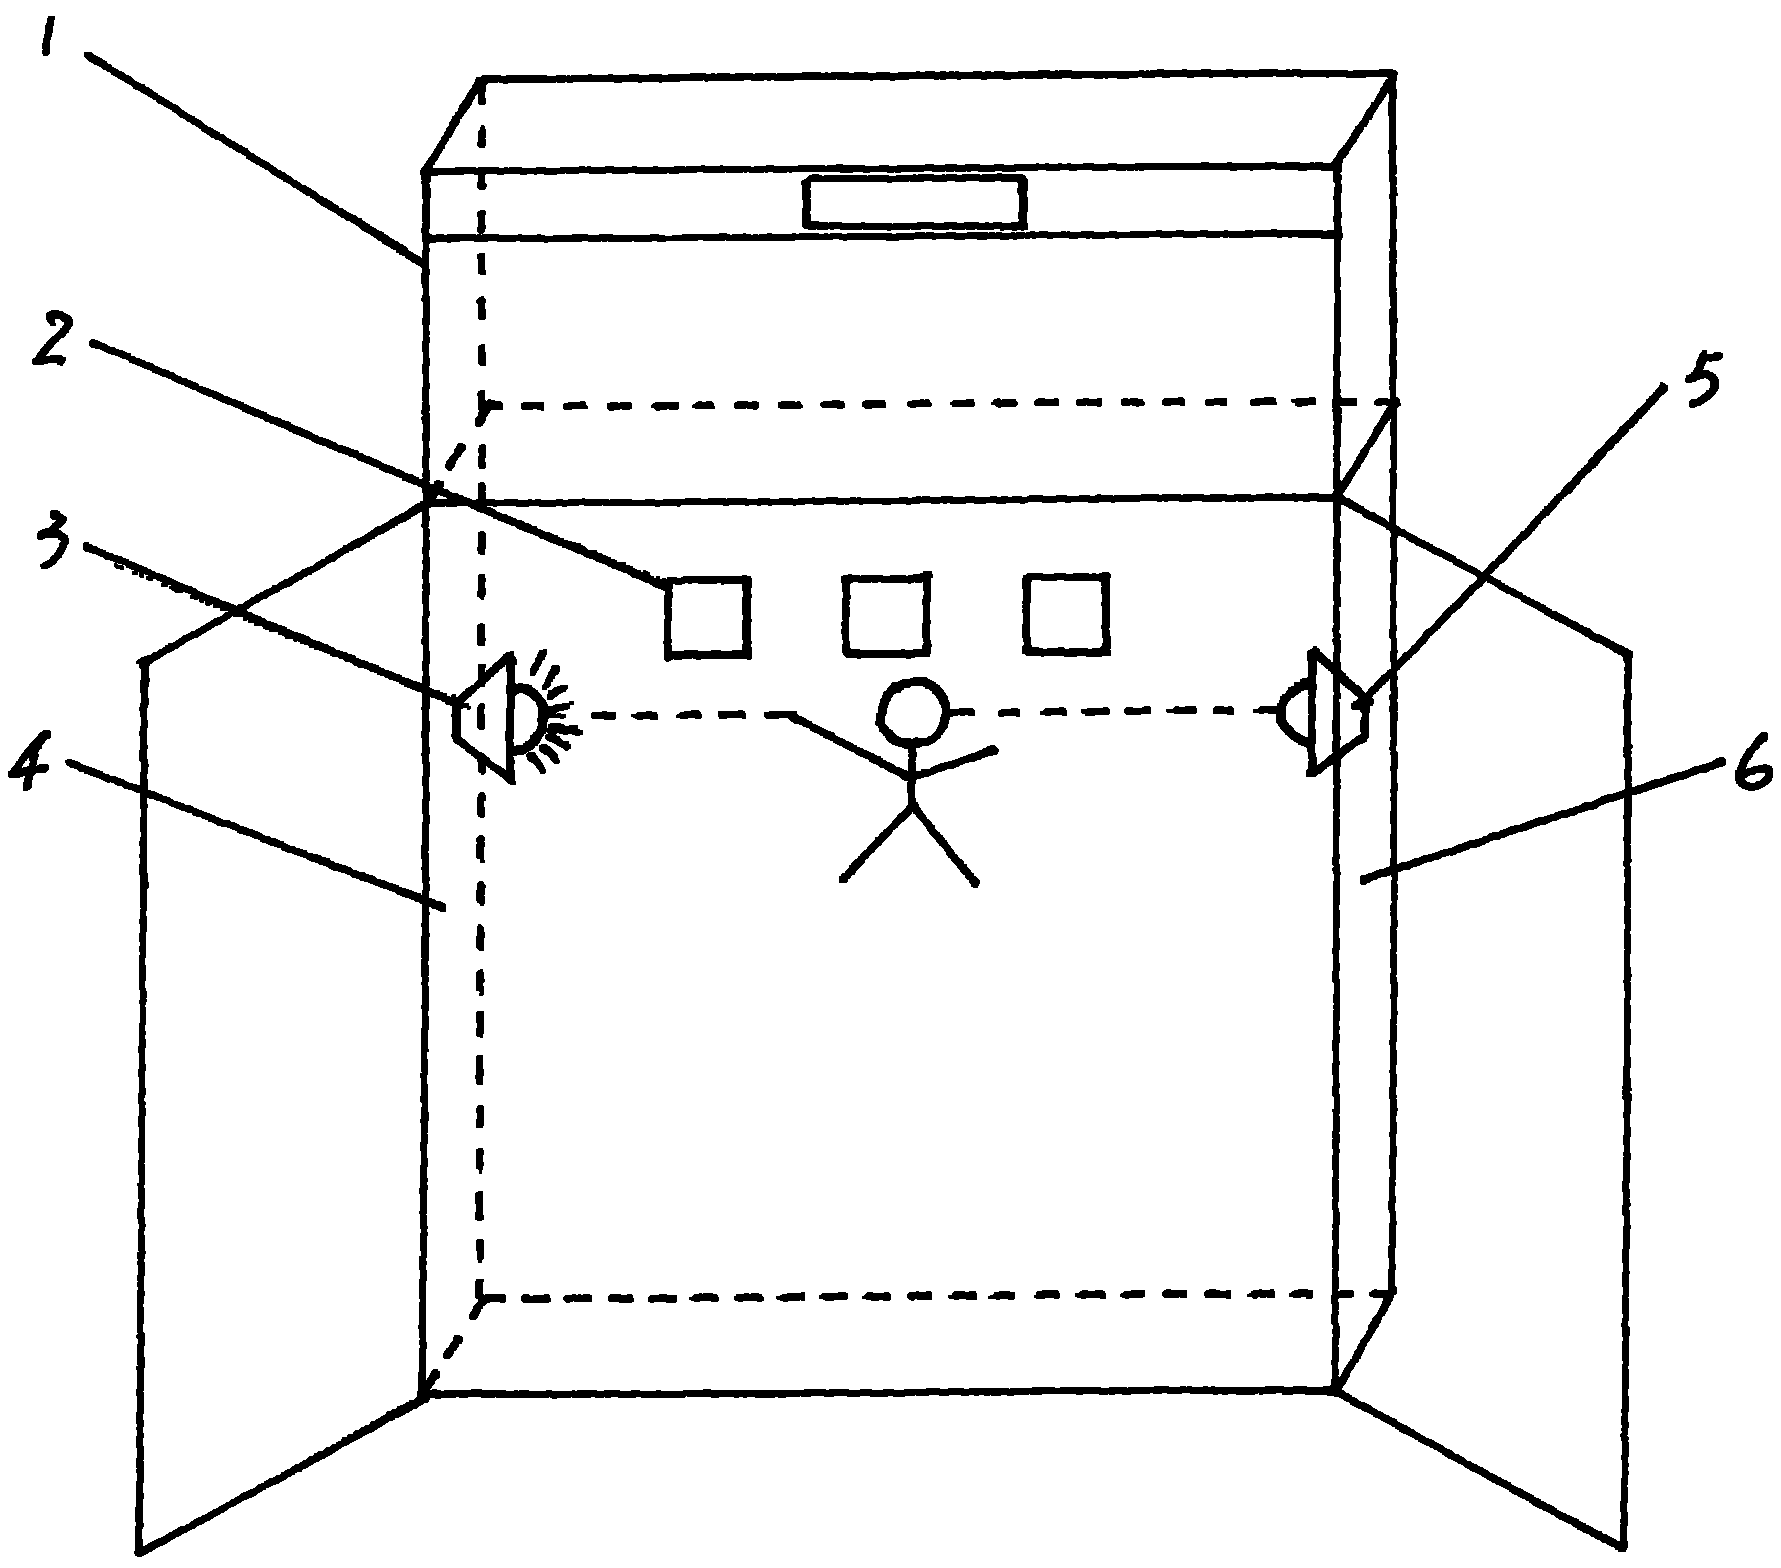 Safety alarm method of high voltage switch maintenance state